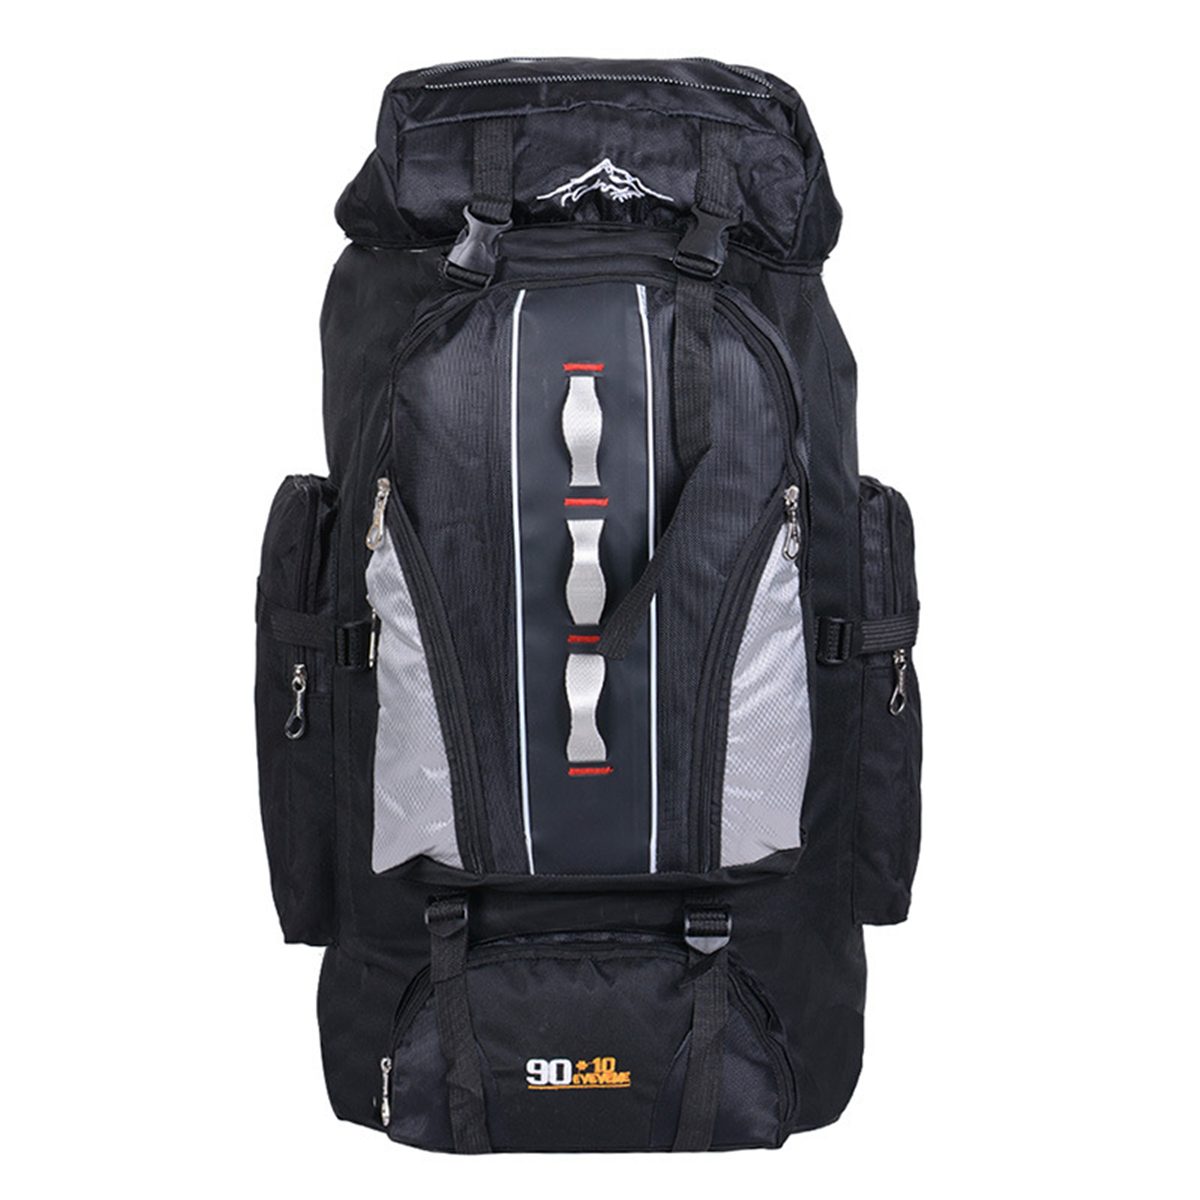 100L Outdoor Hiking Camping Backpack Bag Travel Mountaineering Trekking Day Pack - Auto GoShop